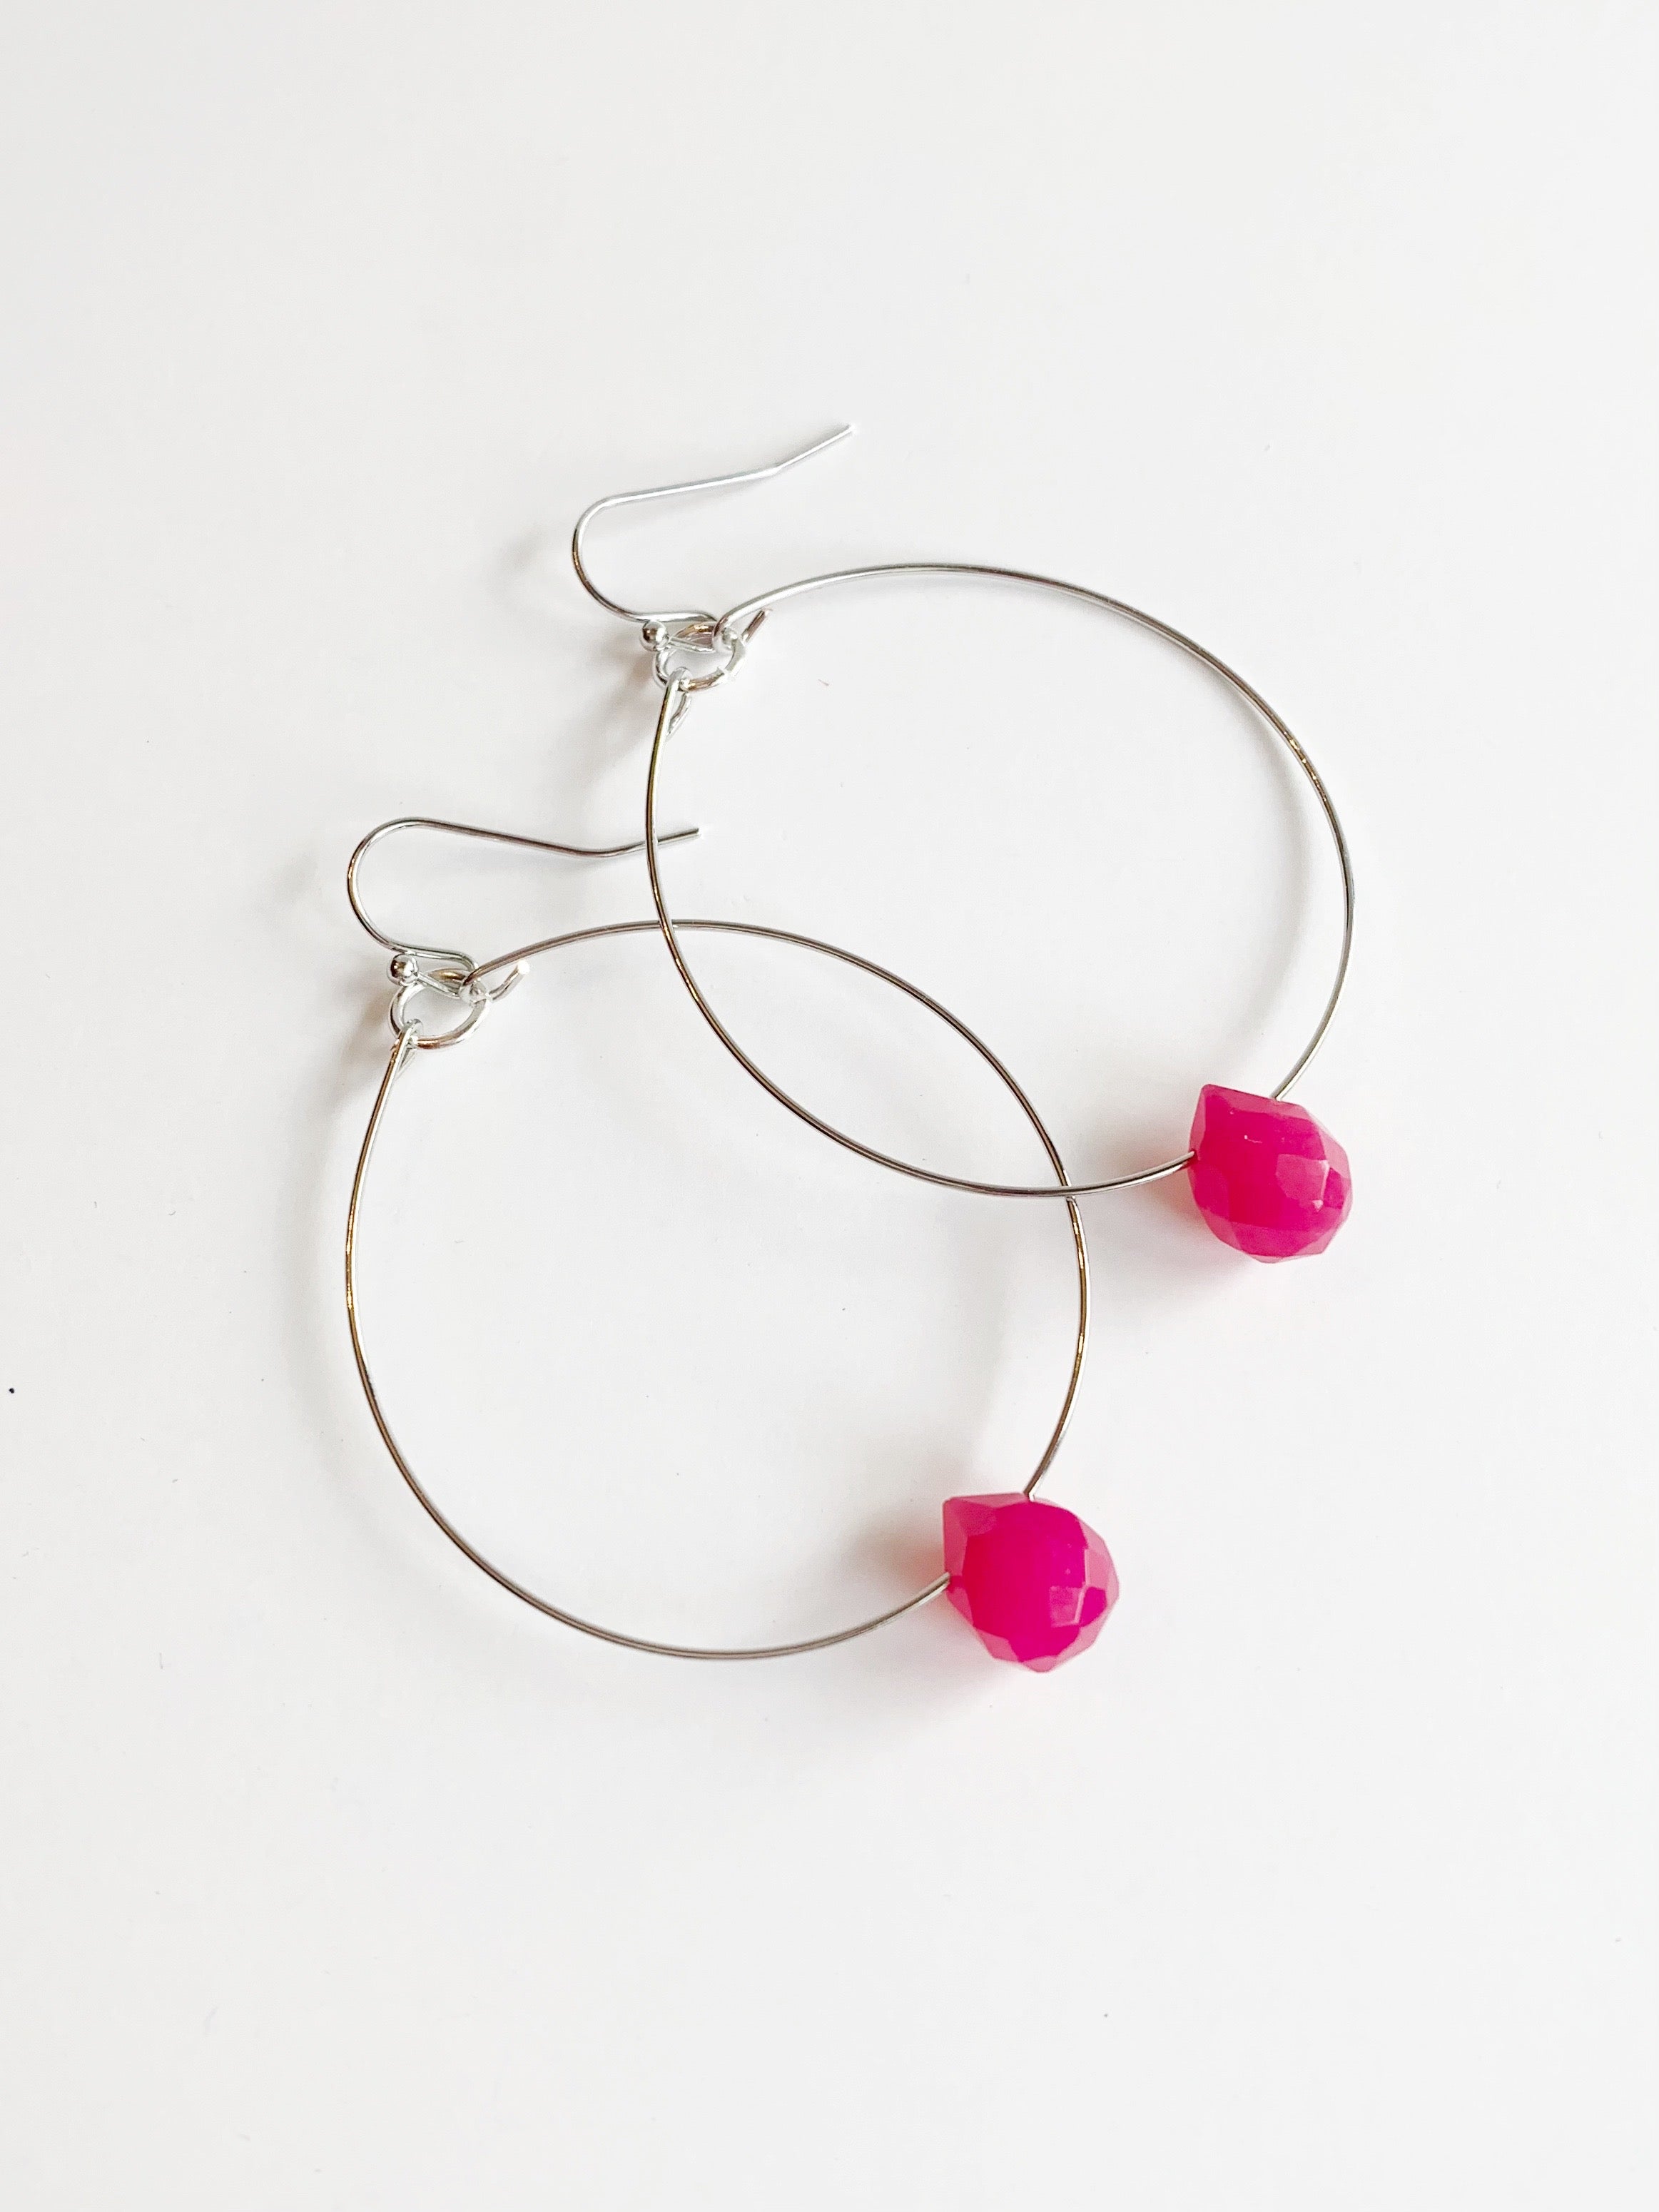 silver hoop earrings with pink accent bead